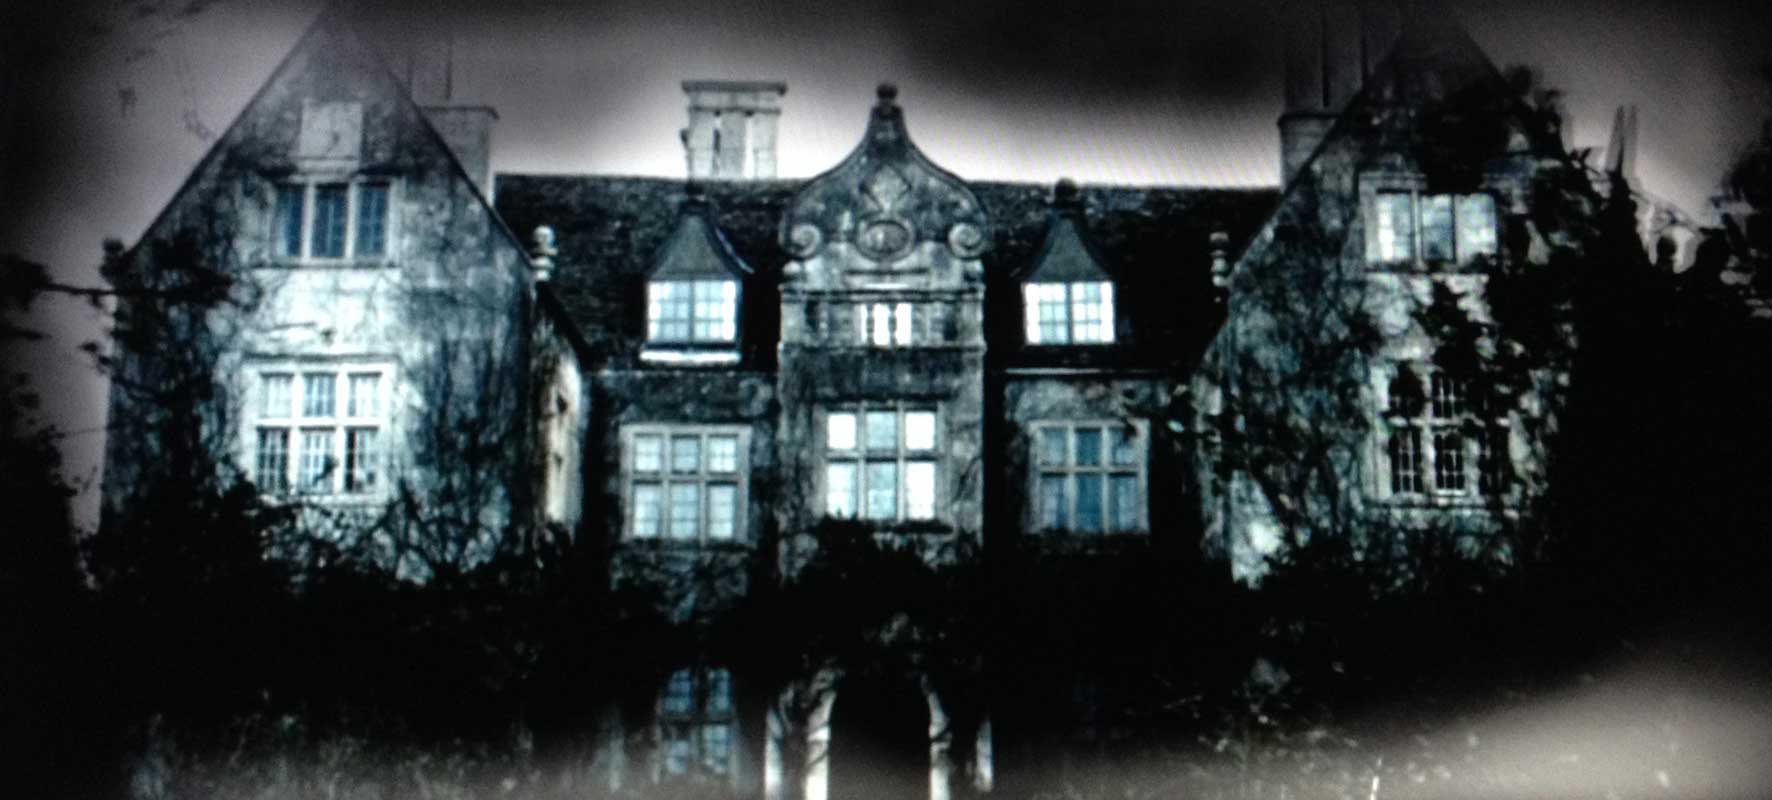 Cotterstock Hall as it appears  on the case cover of DVD The Woman in Black , a 2012 film by Hammer